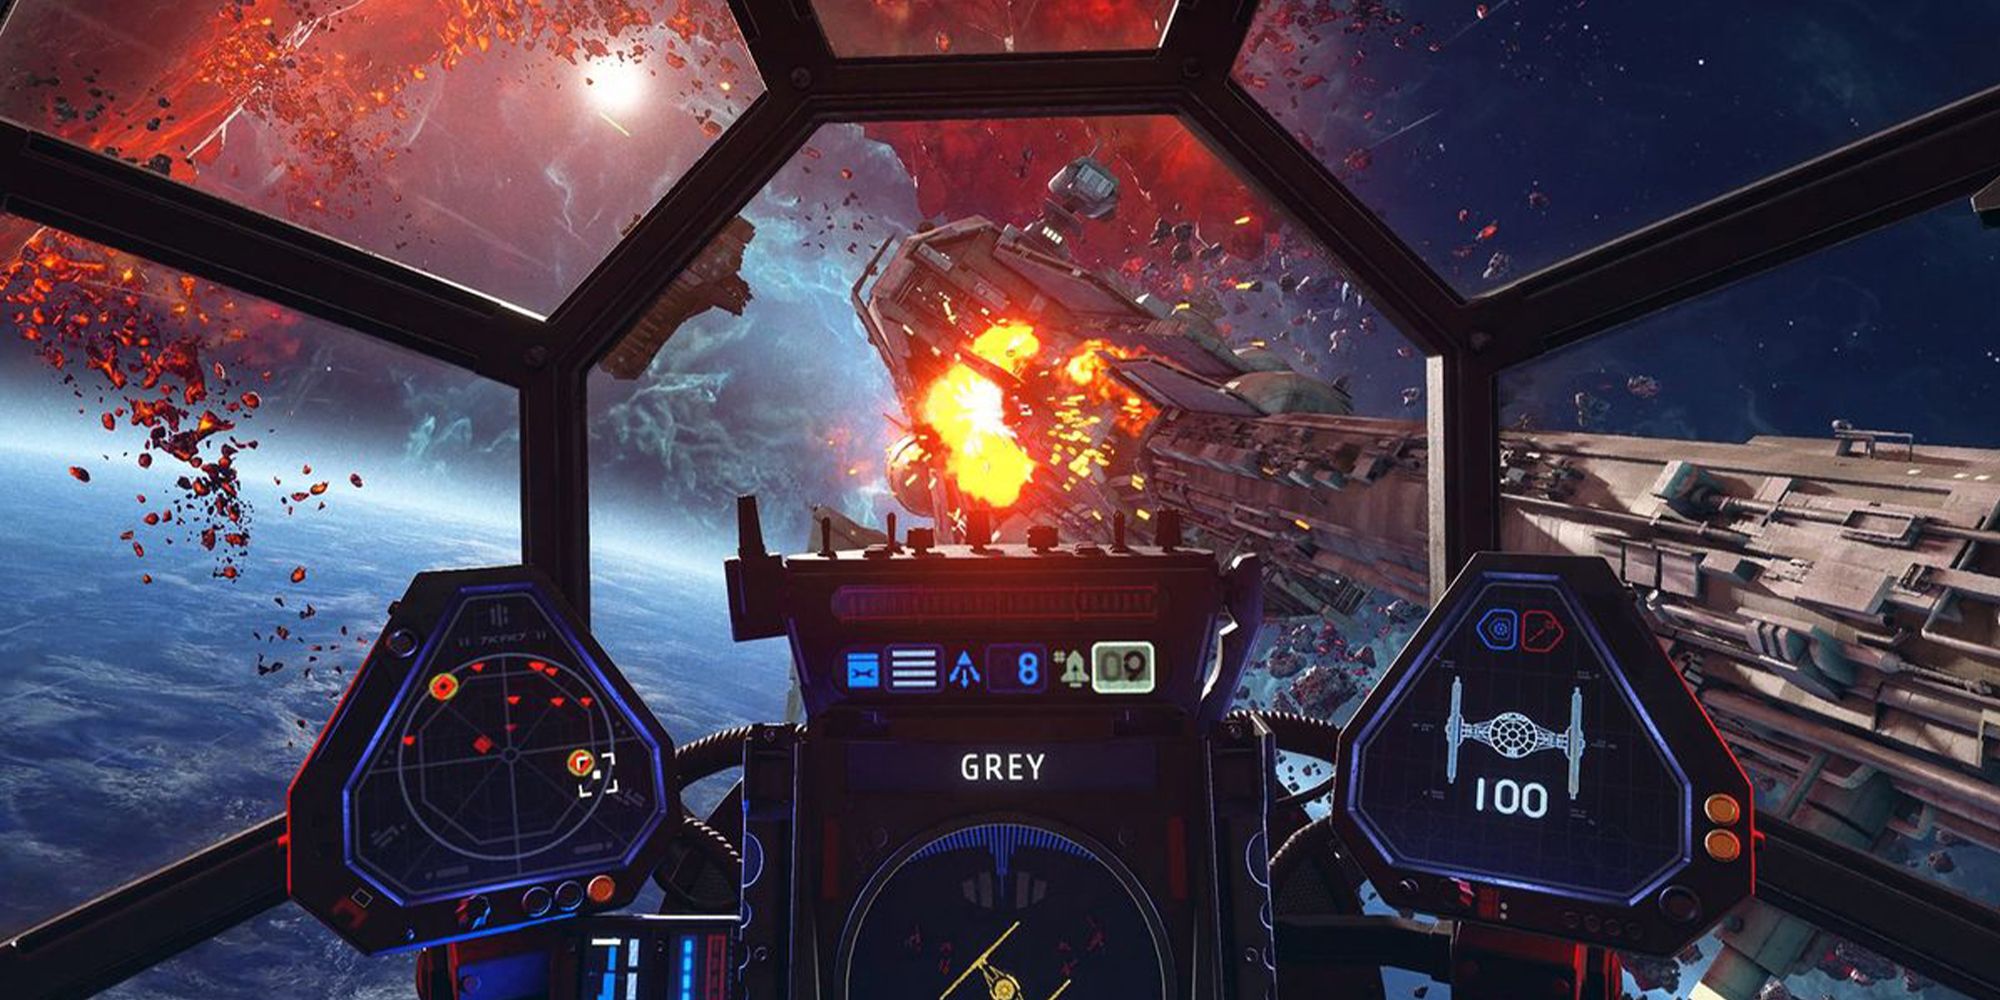 Star Wars Squadrons view of a Star Destroyet from the cockpit of a TIE Fighter